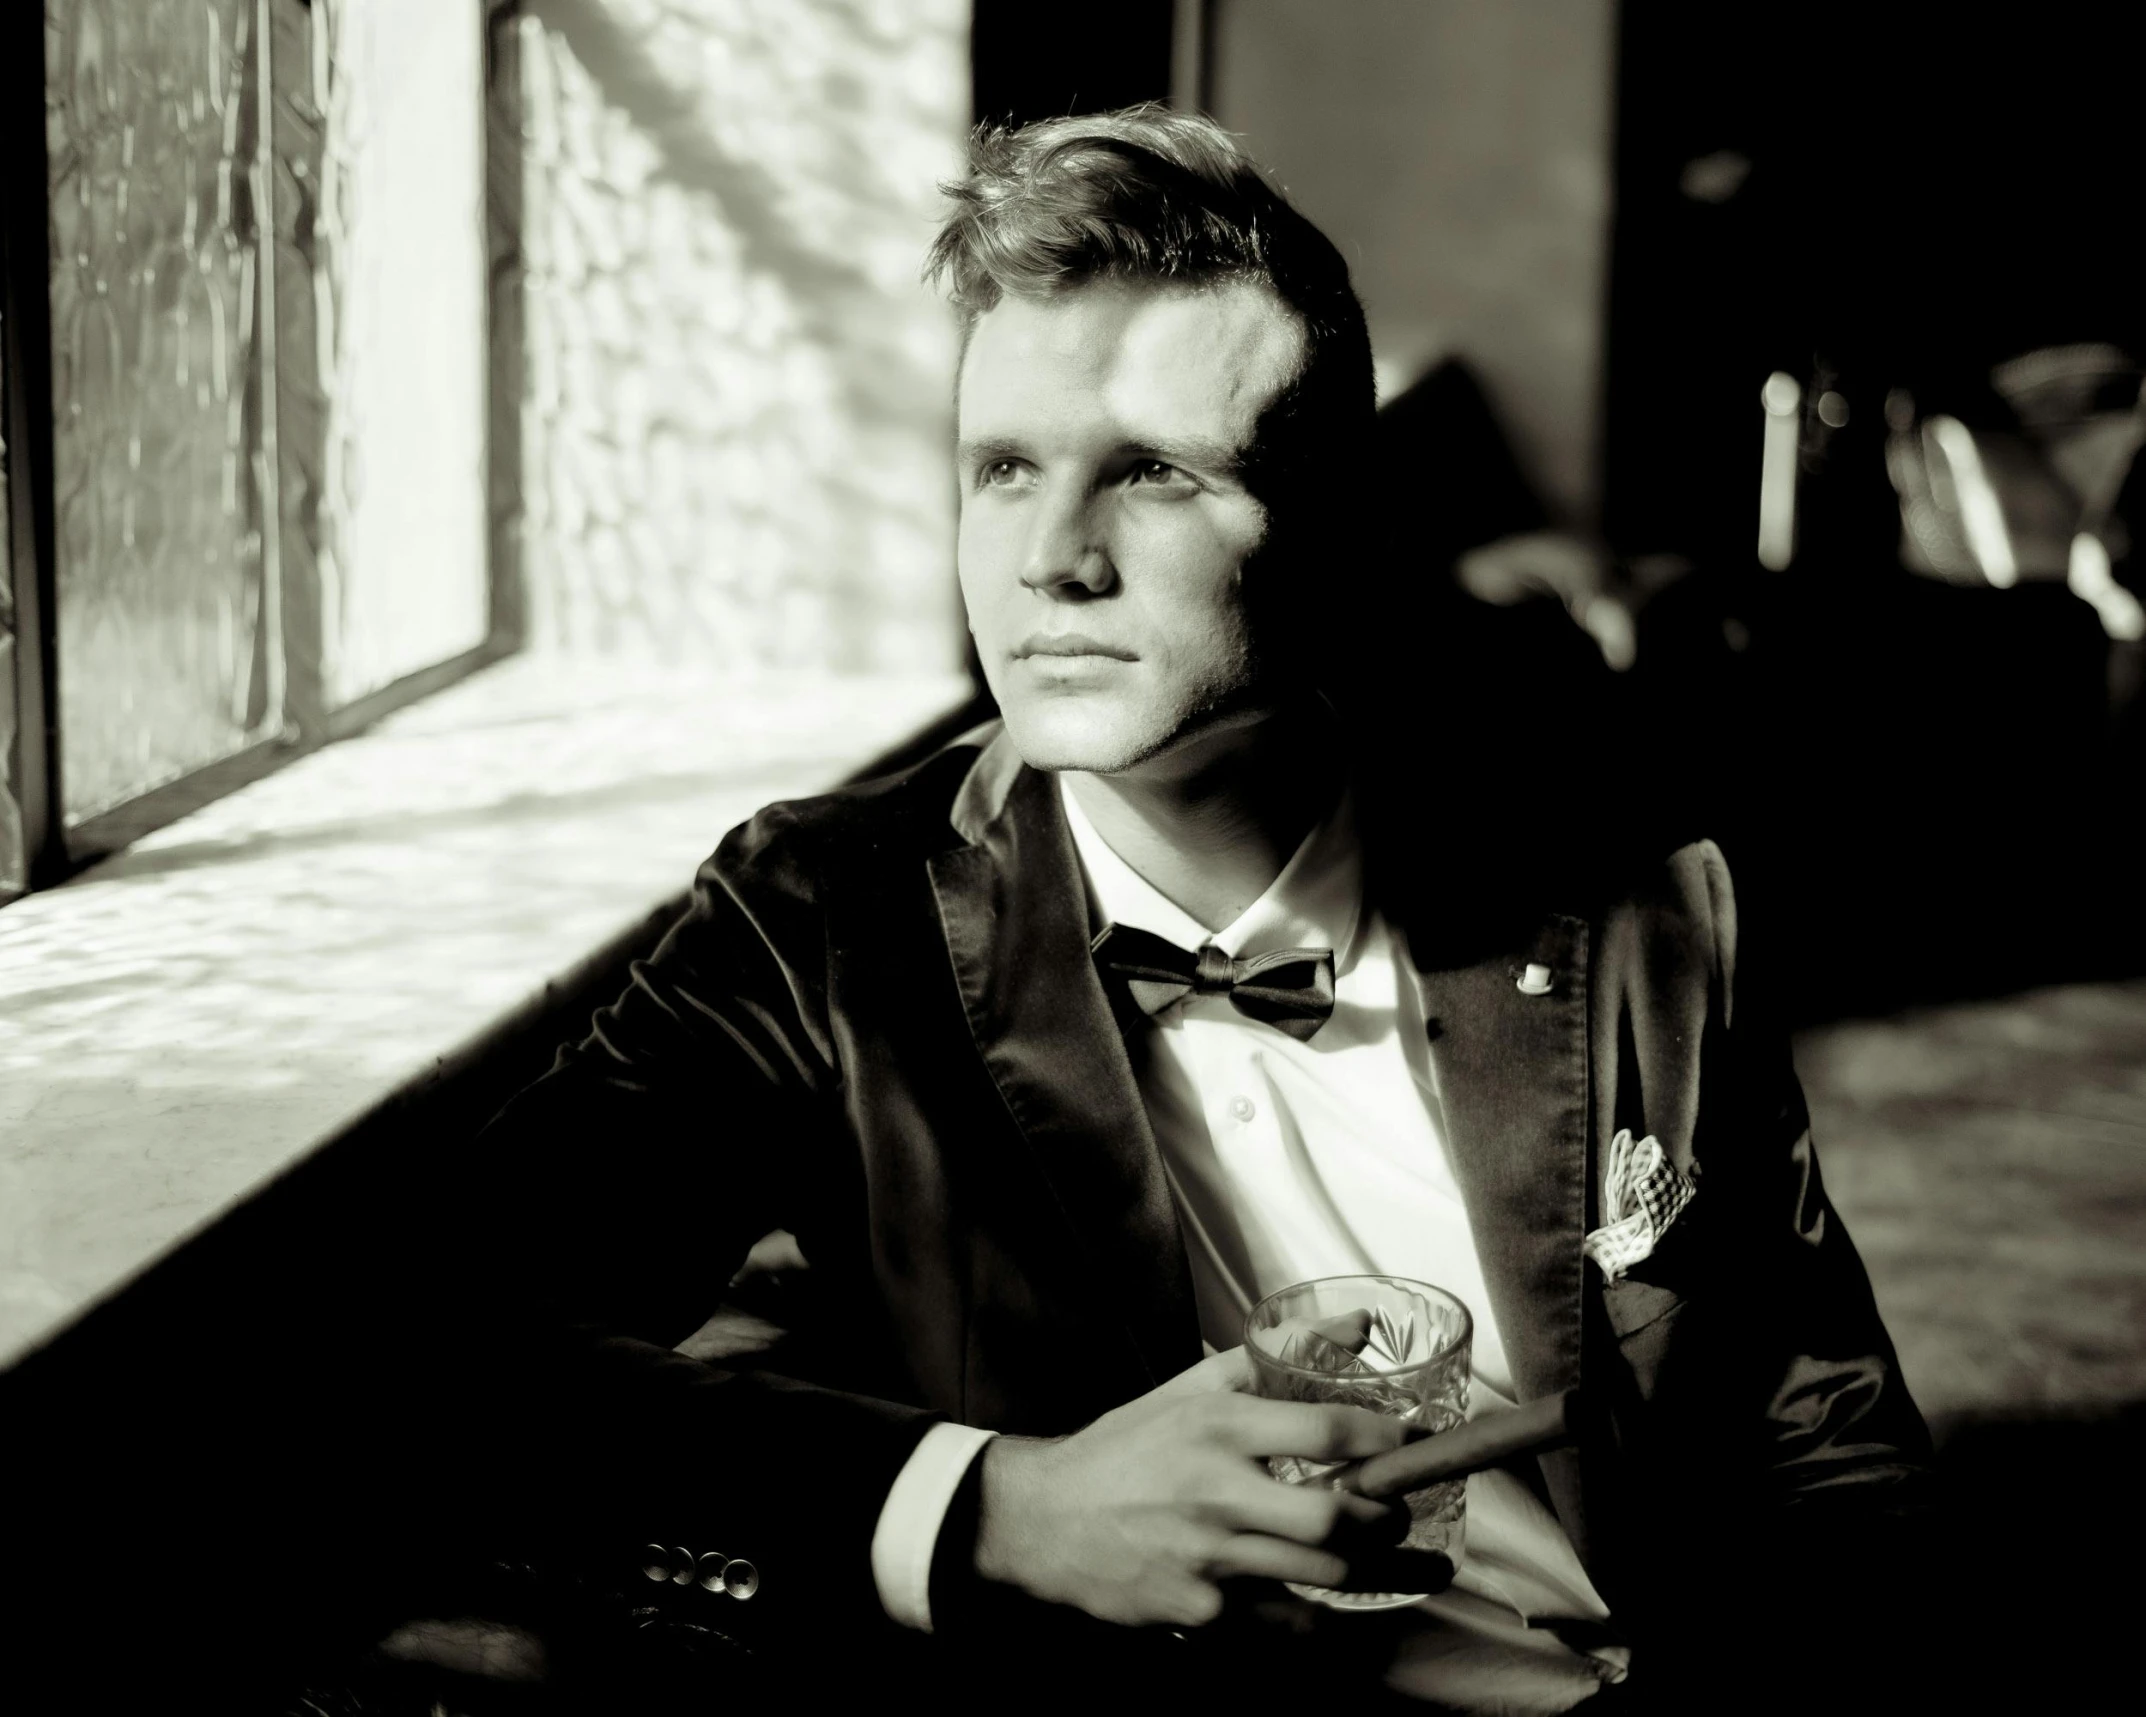 black and white image of a man in tuxedo looking off into the distance